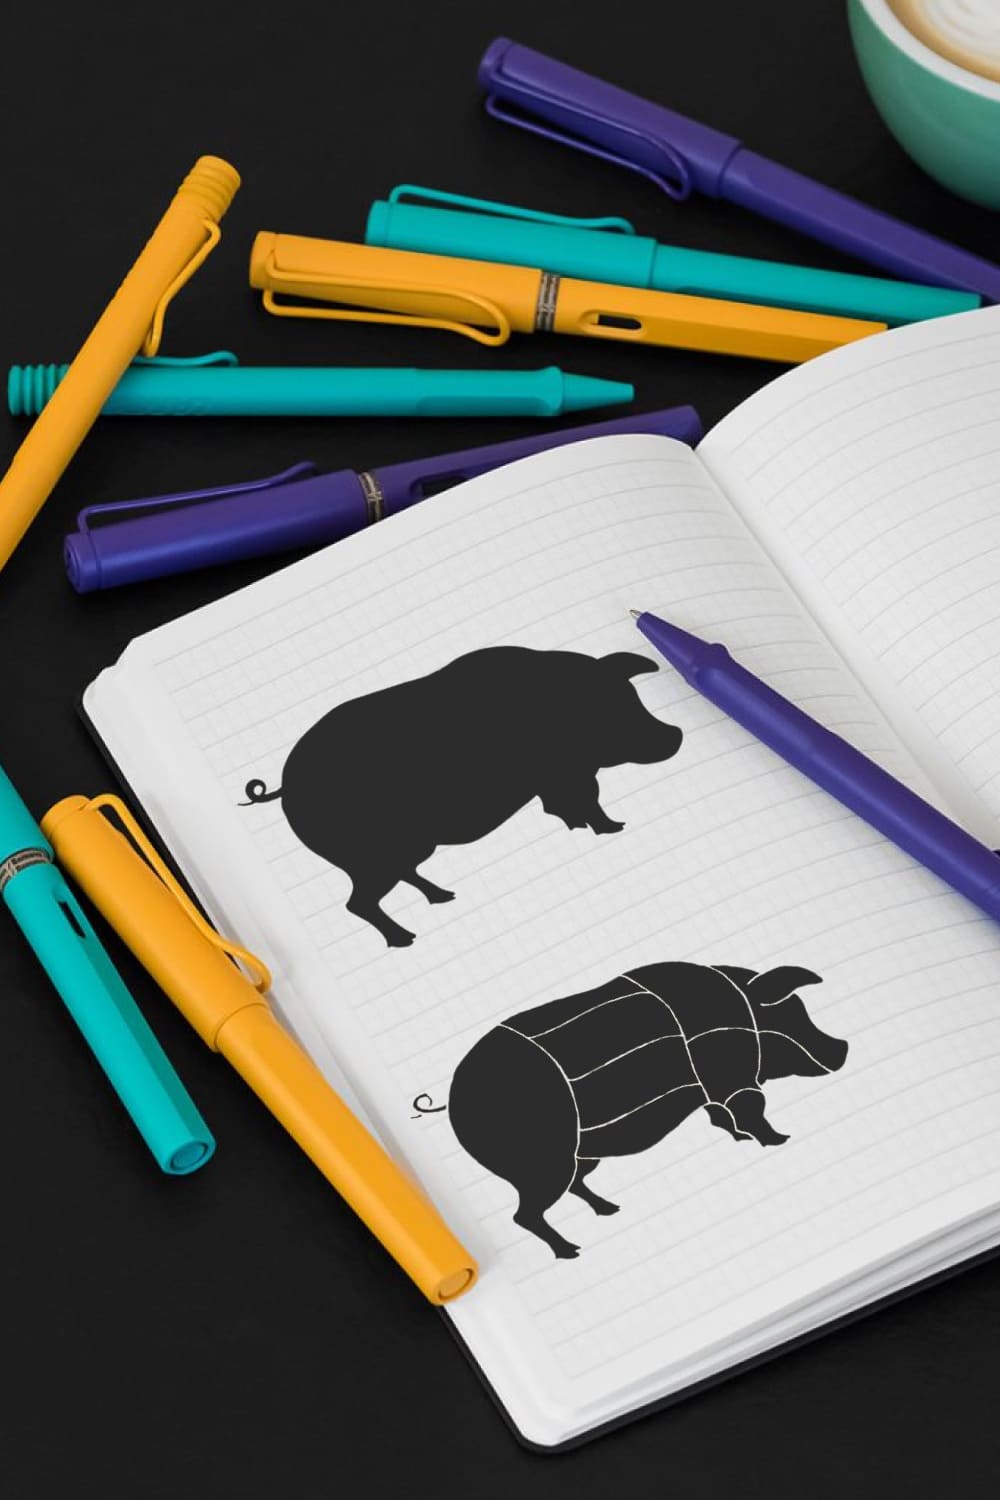 Pig logo on things style.